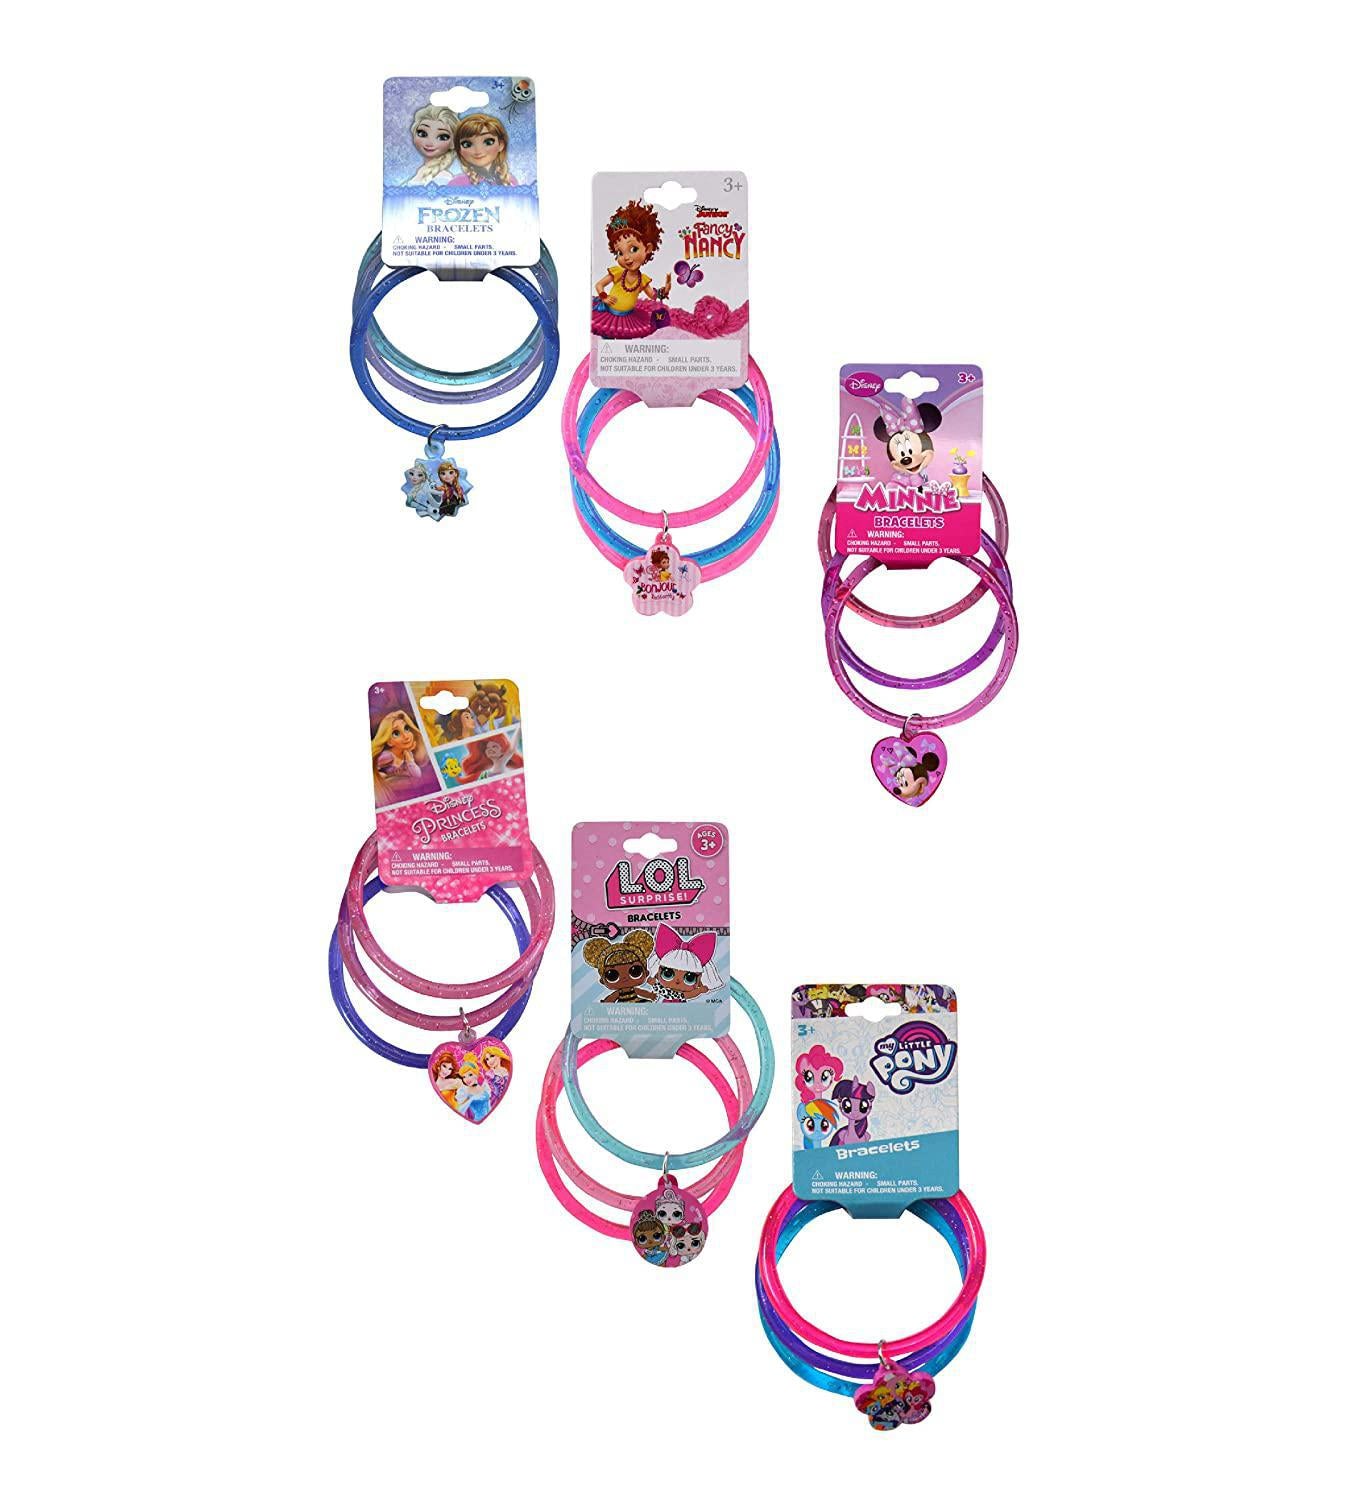 3 Ring on Glitter Bangles with Heart Charm, Multicolor With Frozen, Fancy Nancy, Princess, Minnie, LOL, My Little Pony (1Pcs)